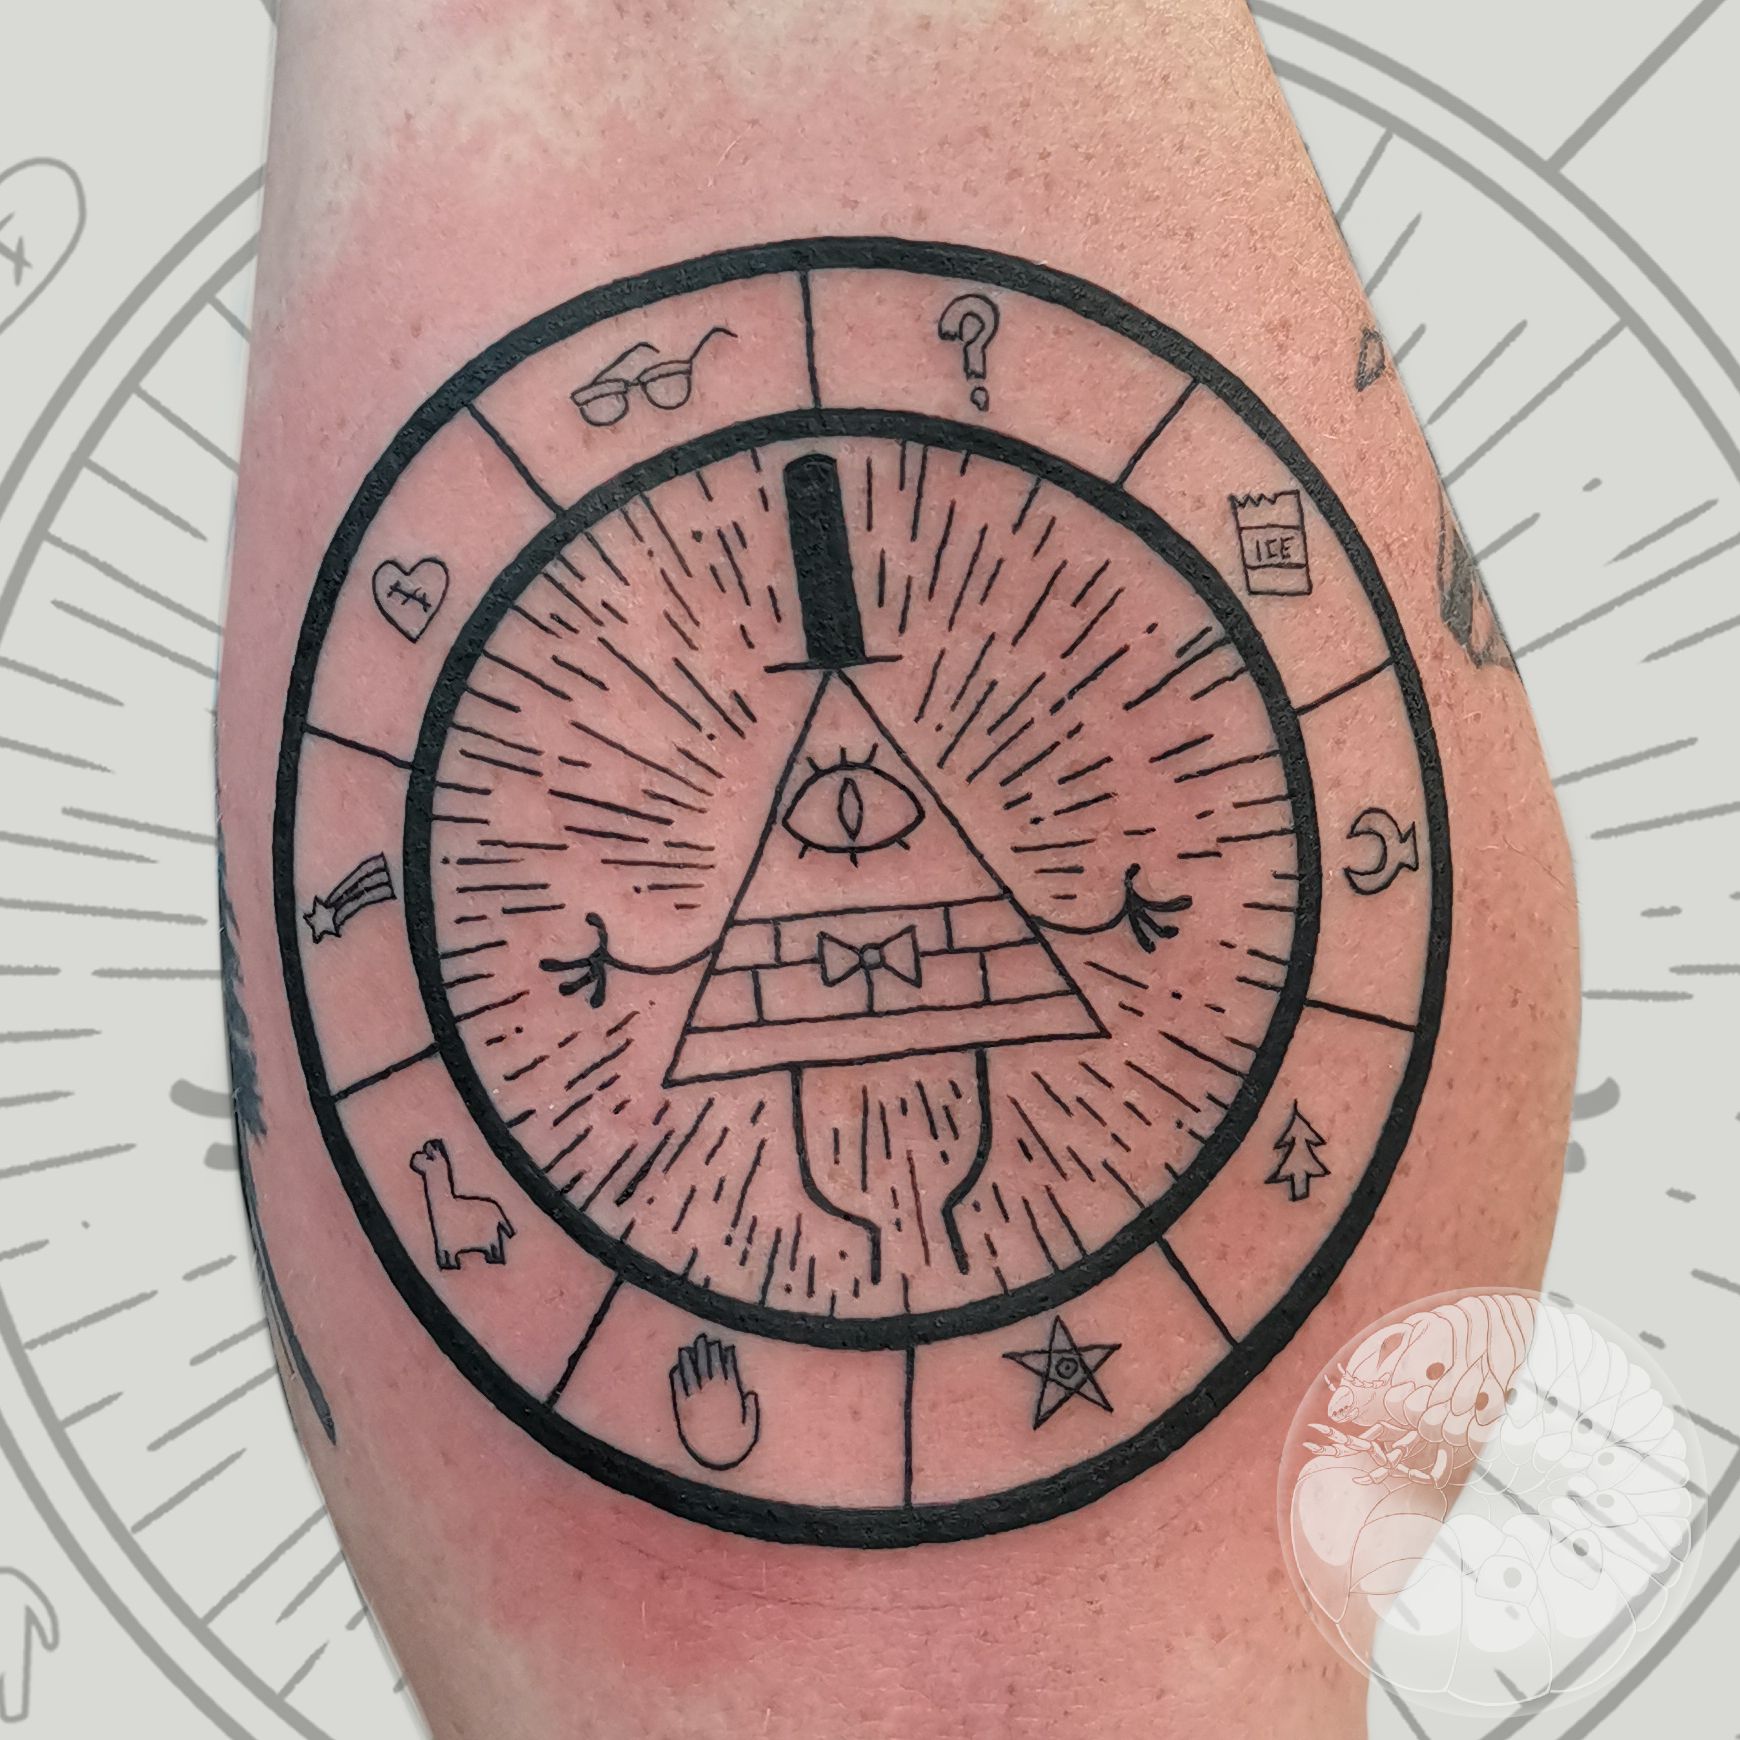 Tattoo uploaded by Adda Meirelles  Character Bill Cipher from the  cartoon Gravity Falls  Tattoodo